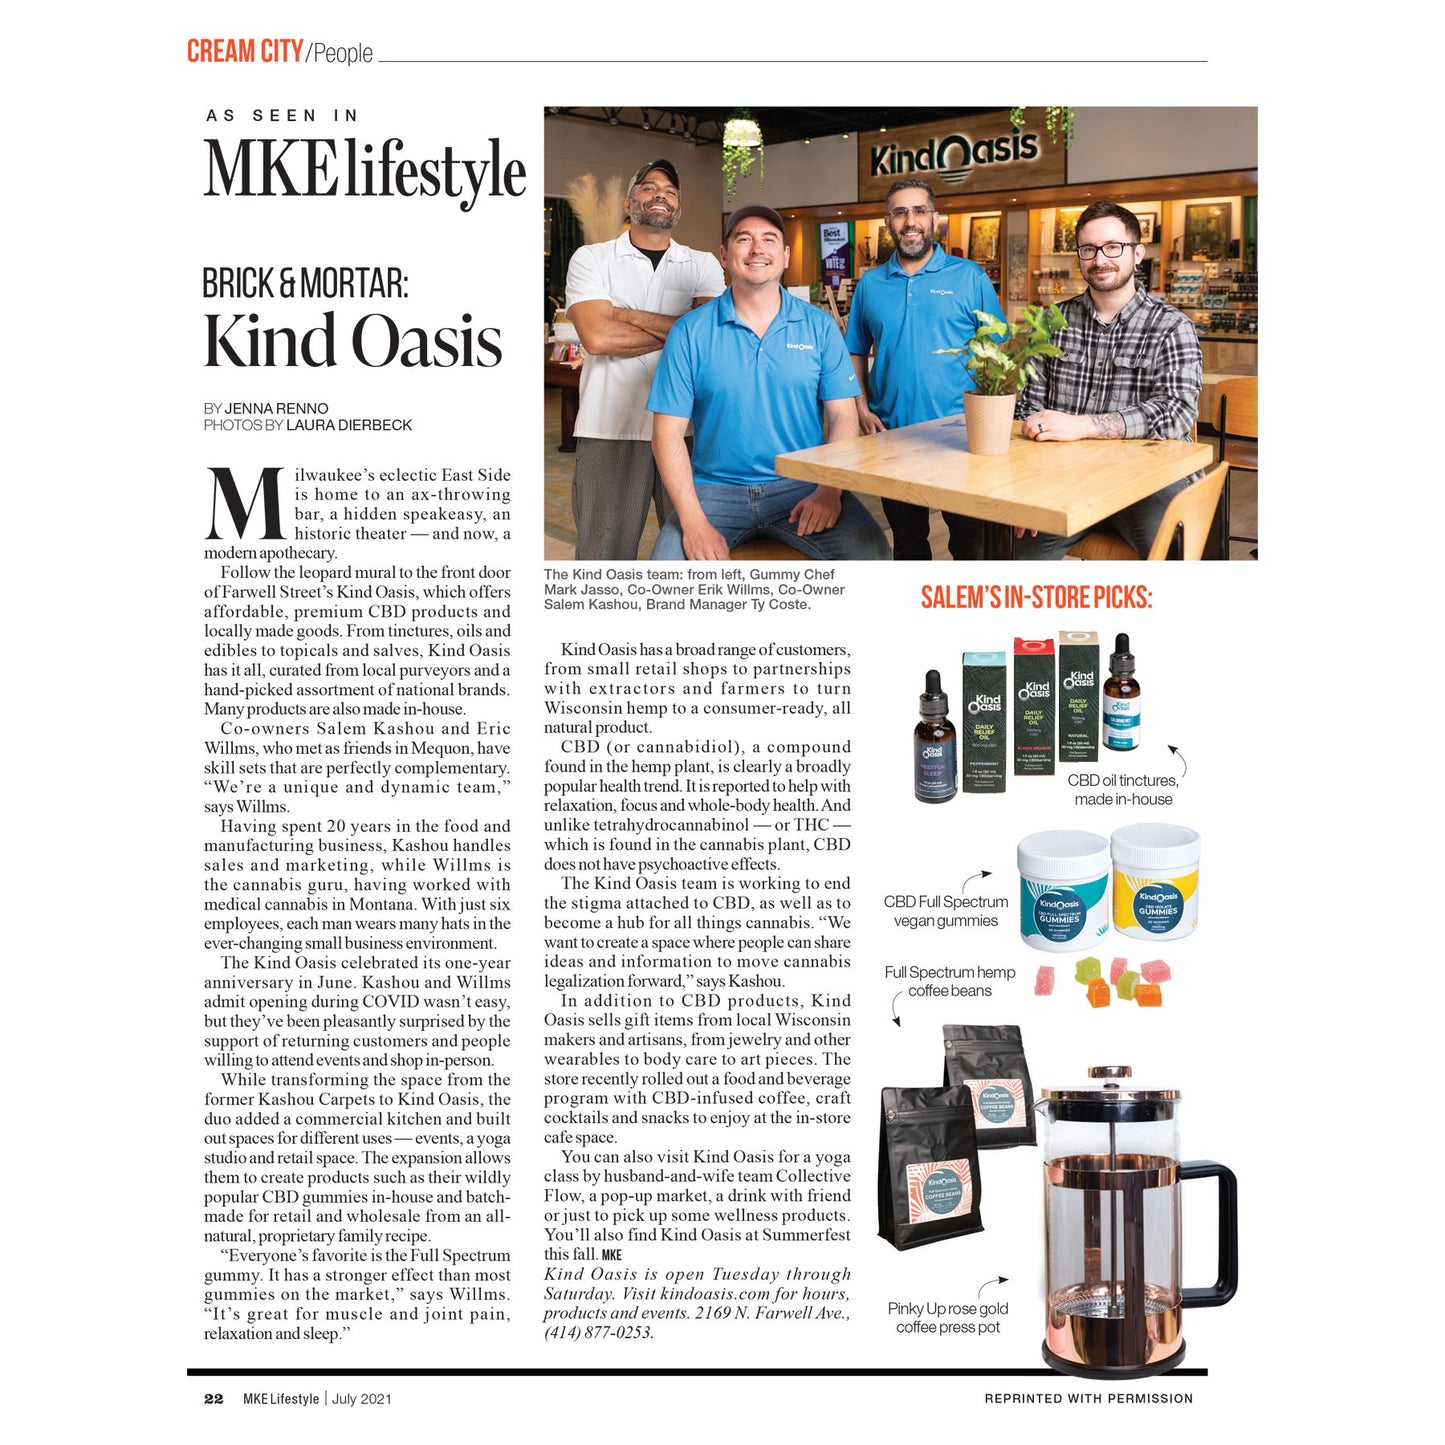 Kind Oasis Featured in MKE Lifestyle Magazine!